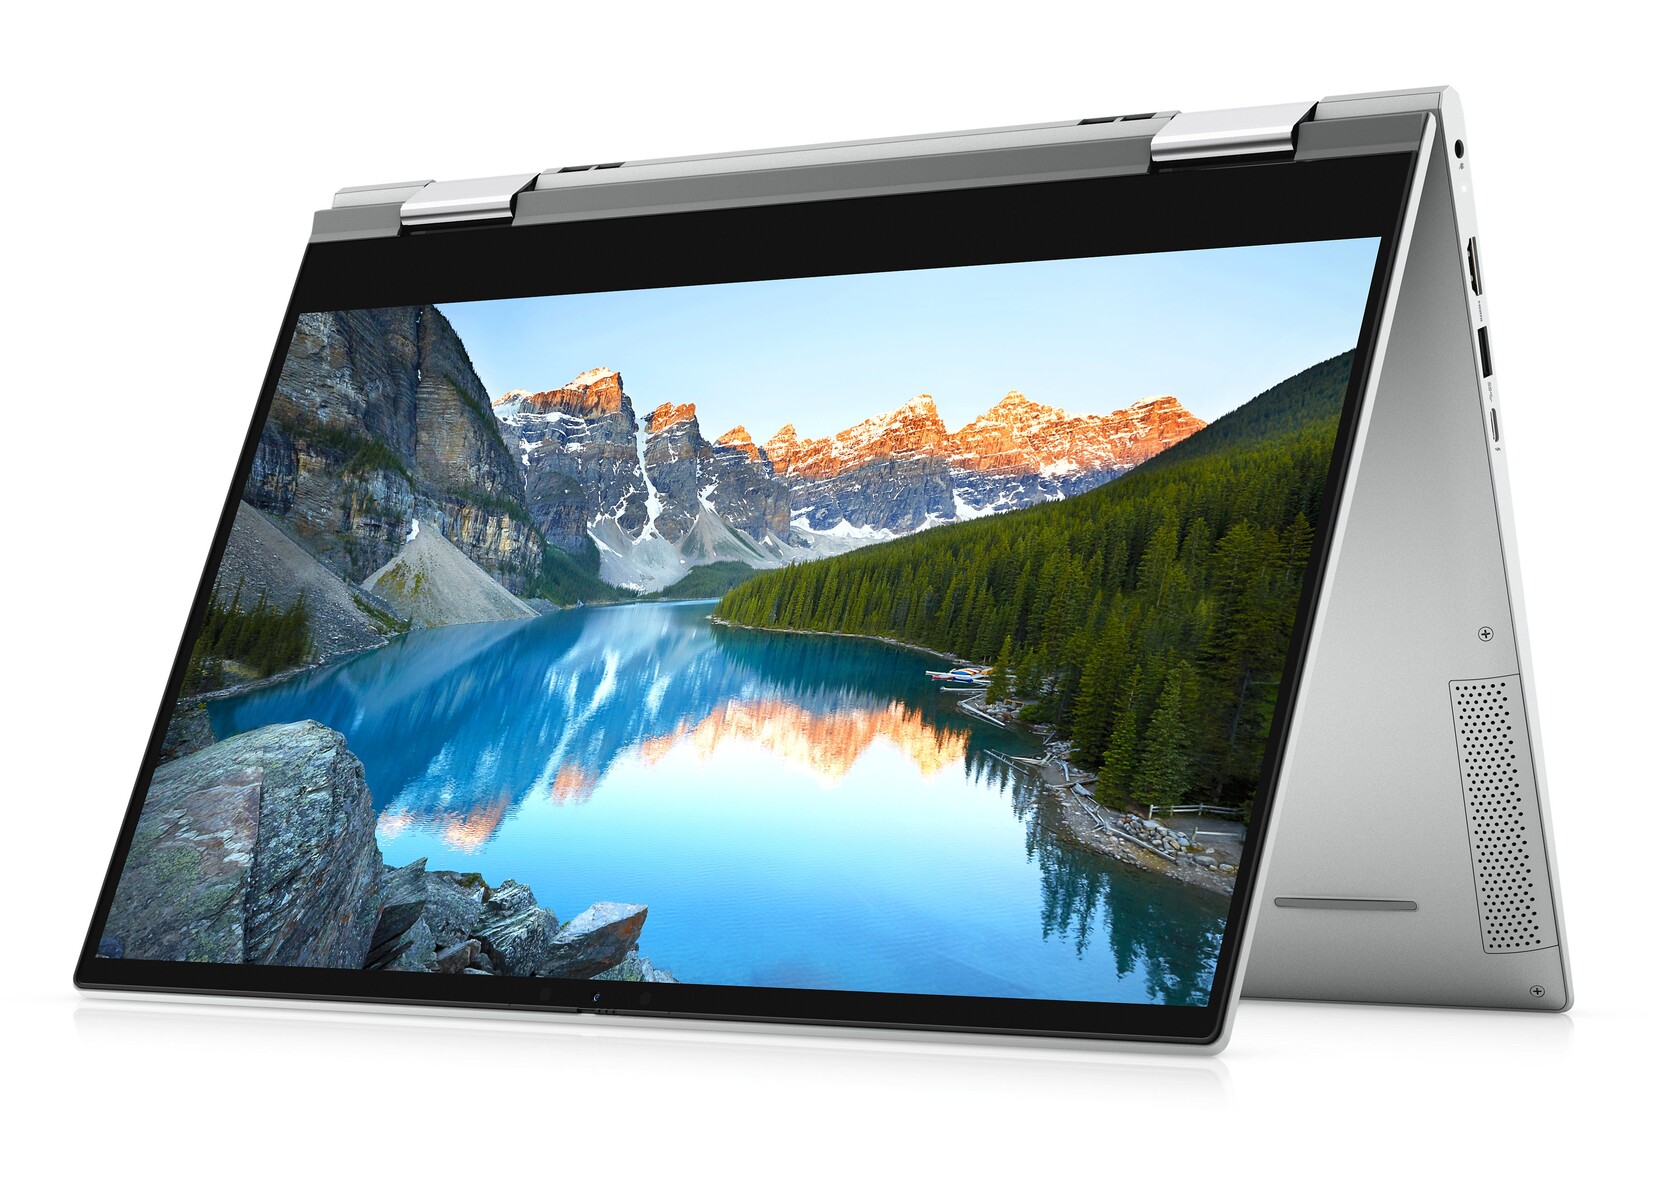  Dell Inspiron 15 7506 2-in-1 Silver Notebook